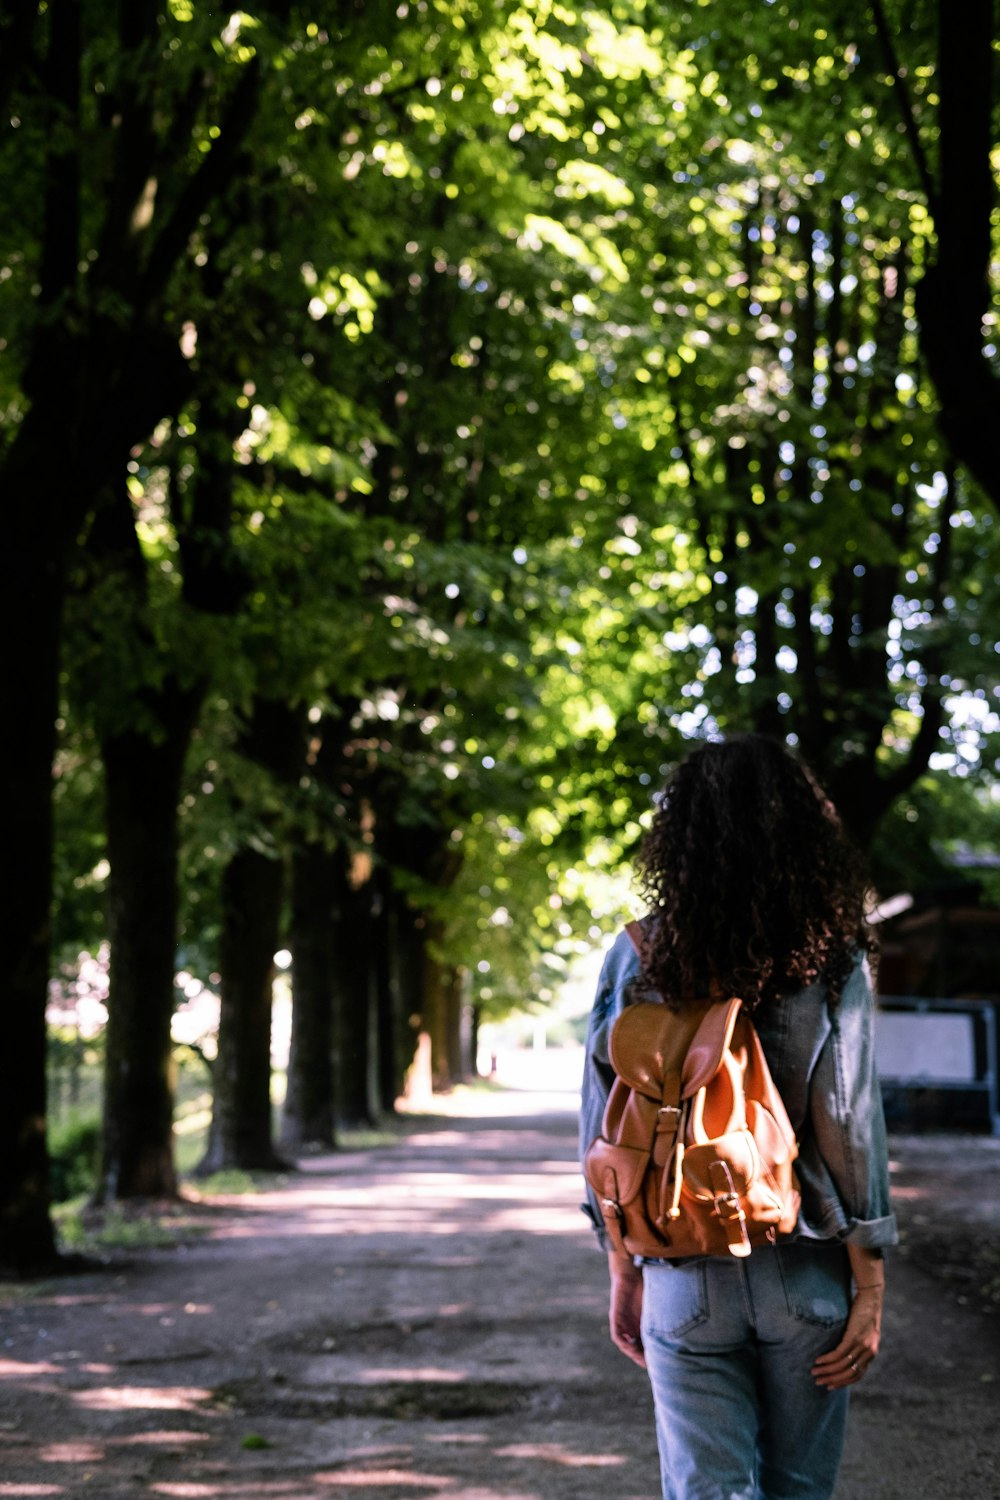 woman in brown and white dress walking on pathway between green trees during daytime